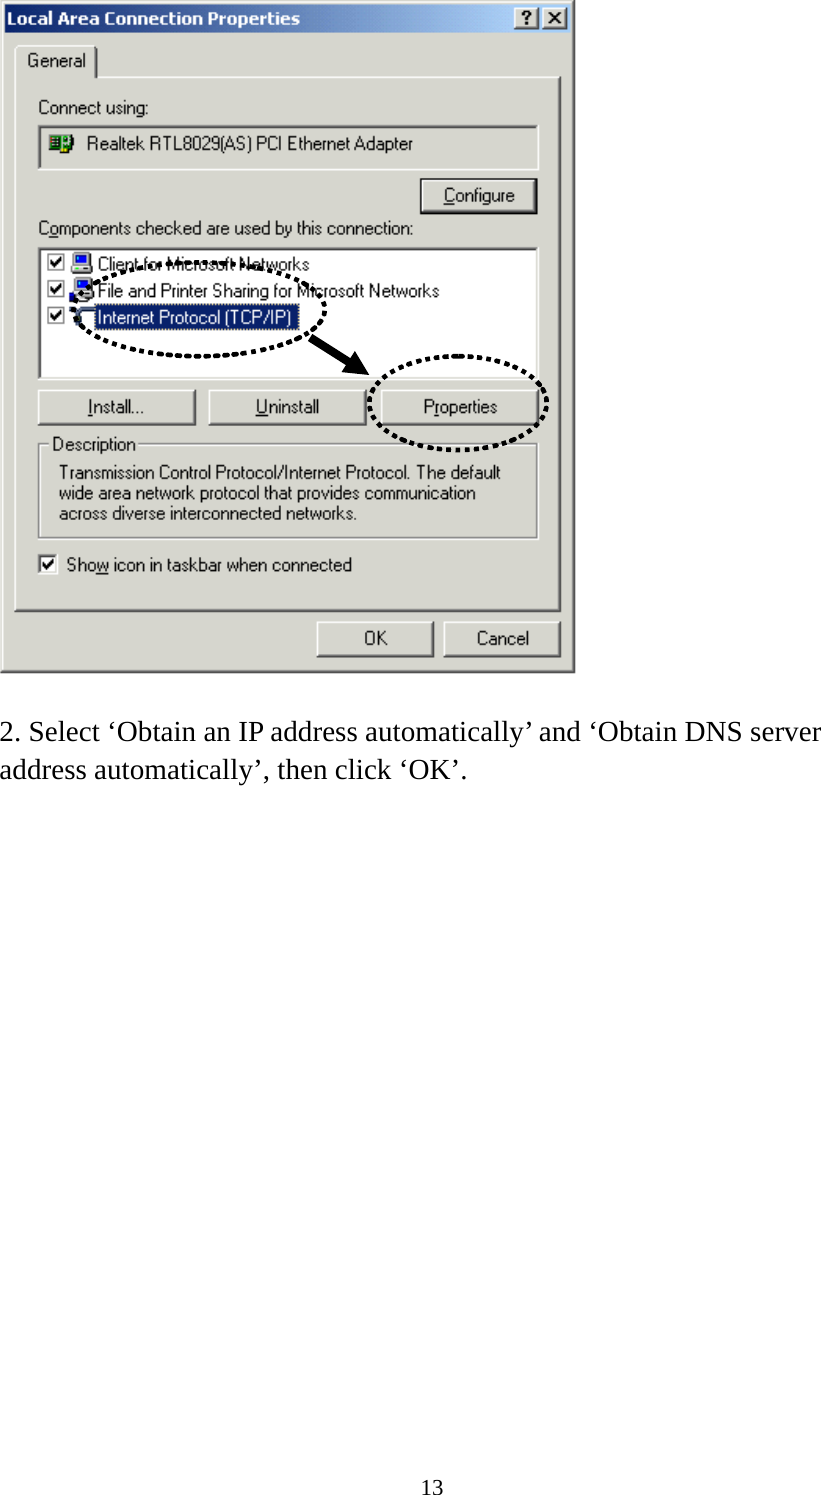 13   2. Select ‘Obtain an IP address automatically’ and ‘Obtain DNS server address automatically’, then click ‘OK’.  